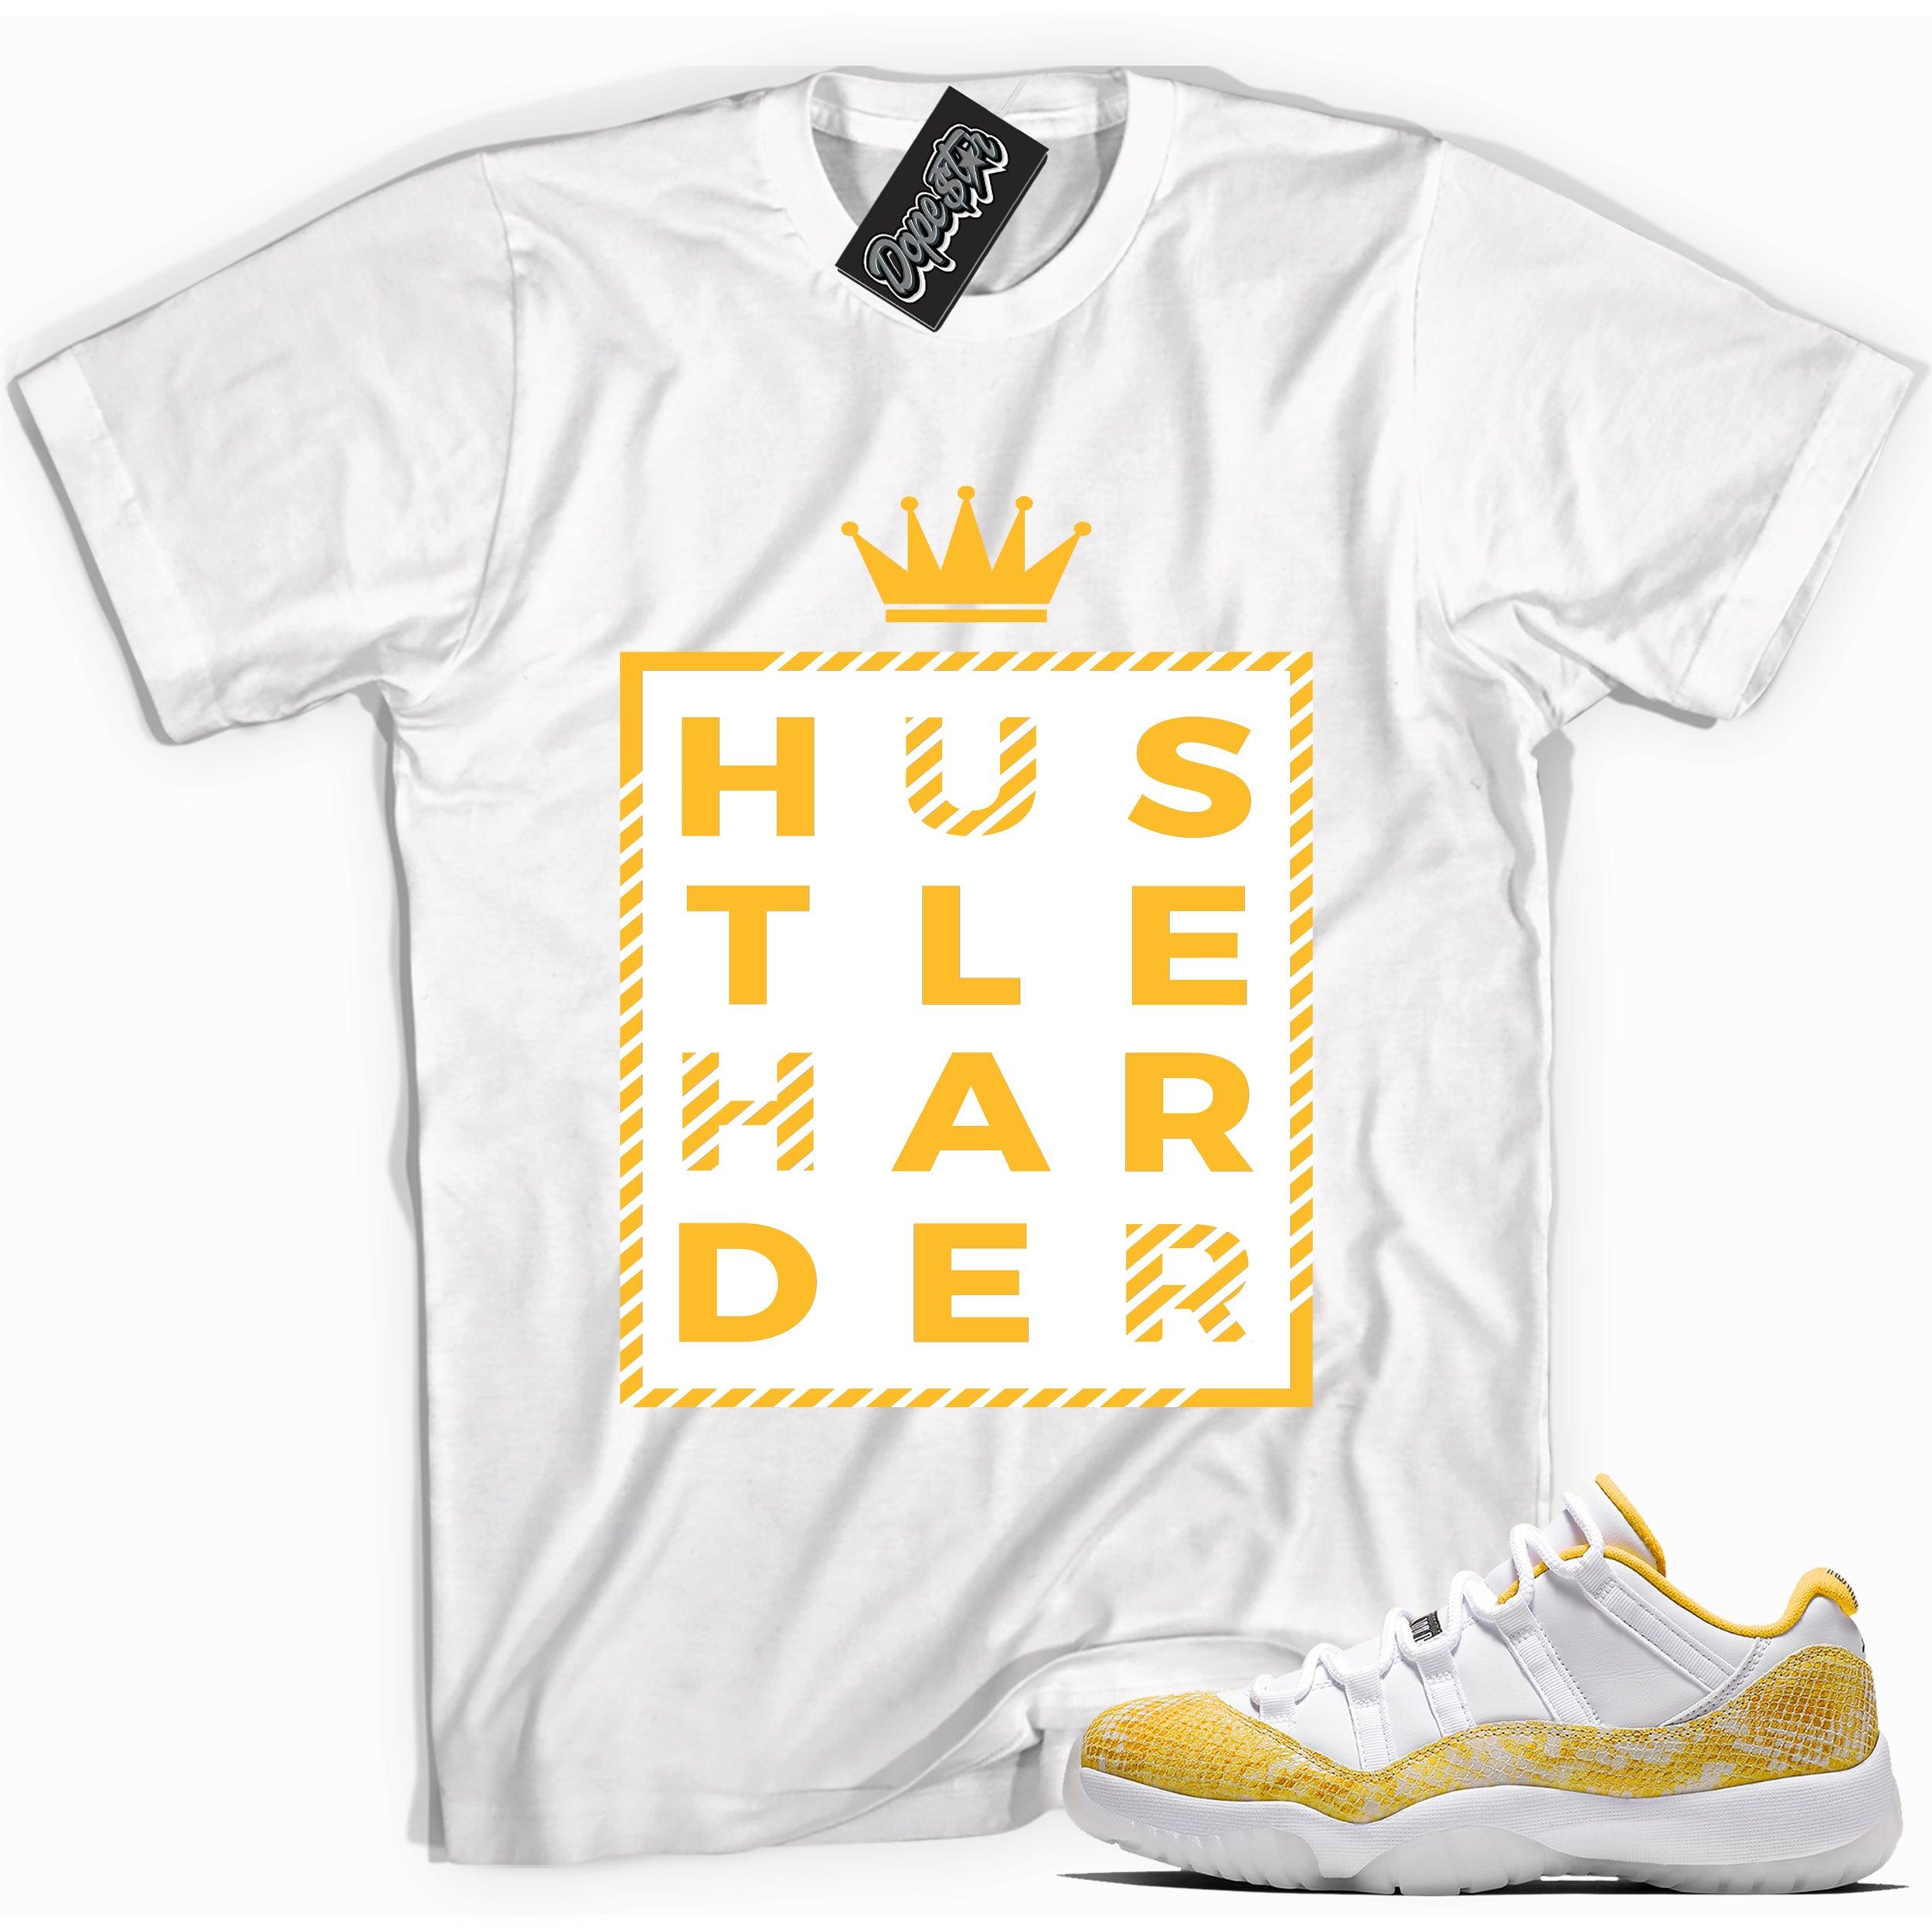 Cool white graphic tee with 'hustle harder' print, that perfectly matches Air Jordan 11 Low Yellow Snakeskin sneakers